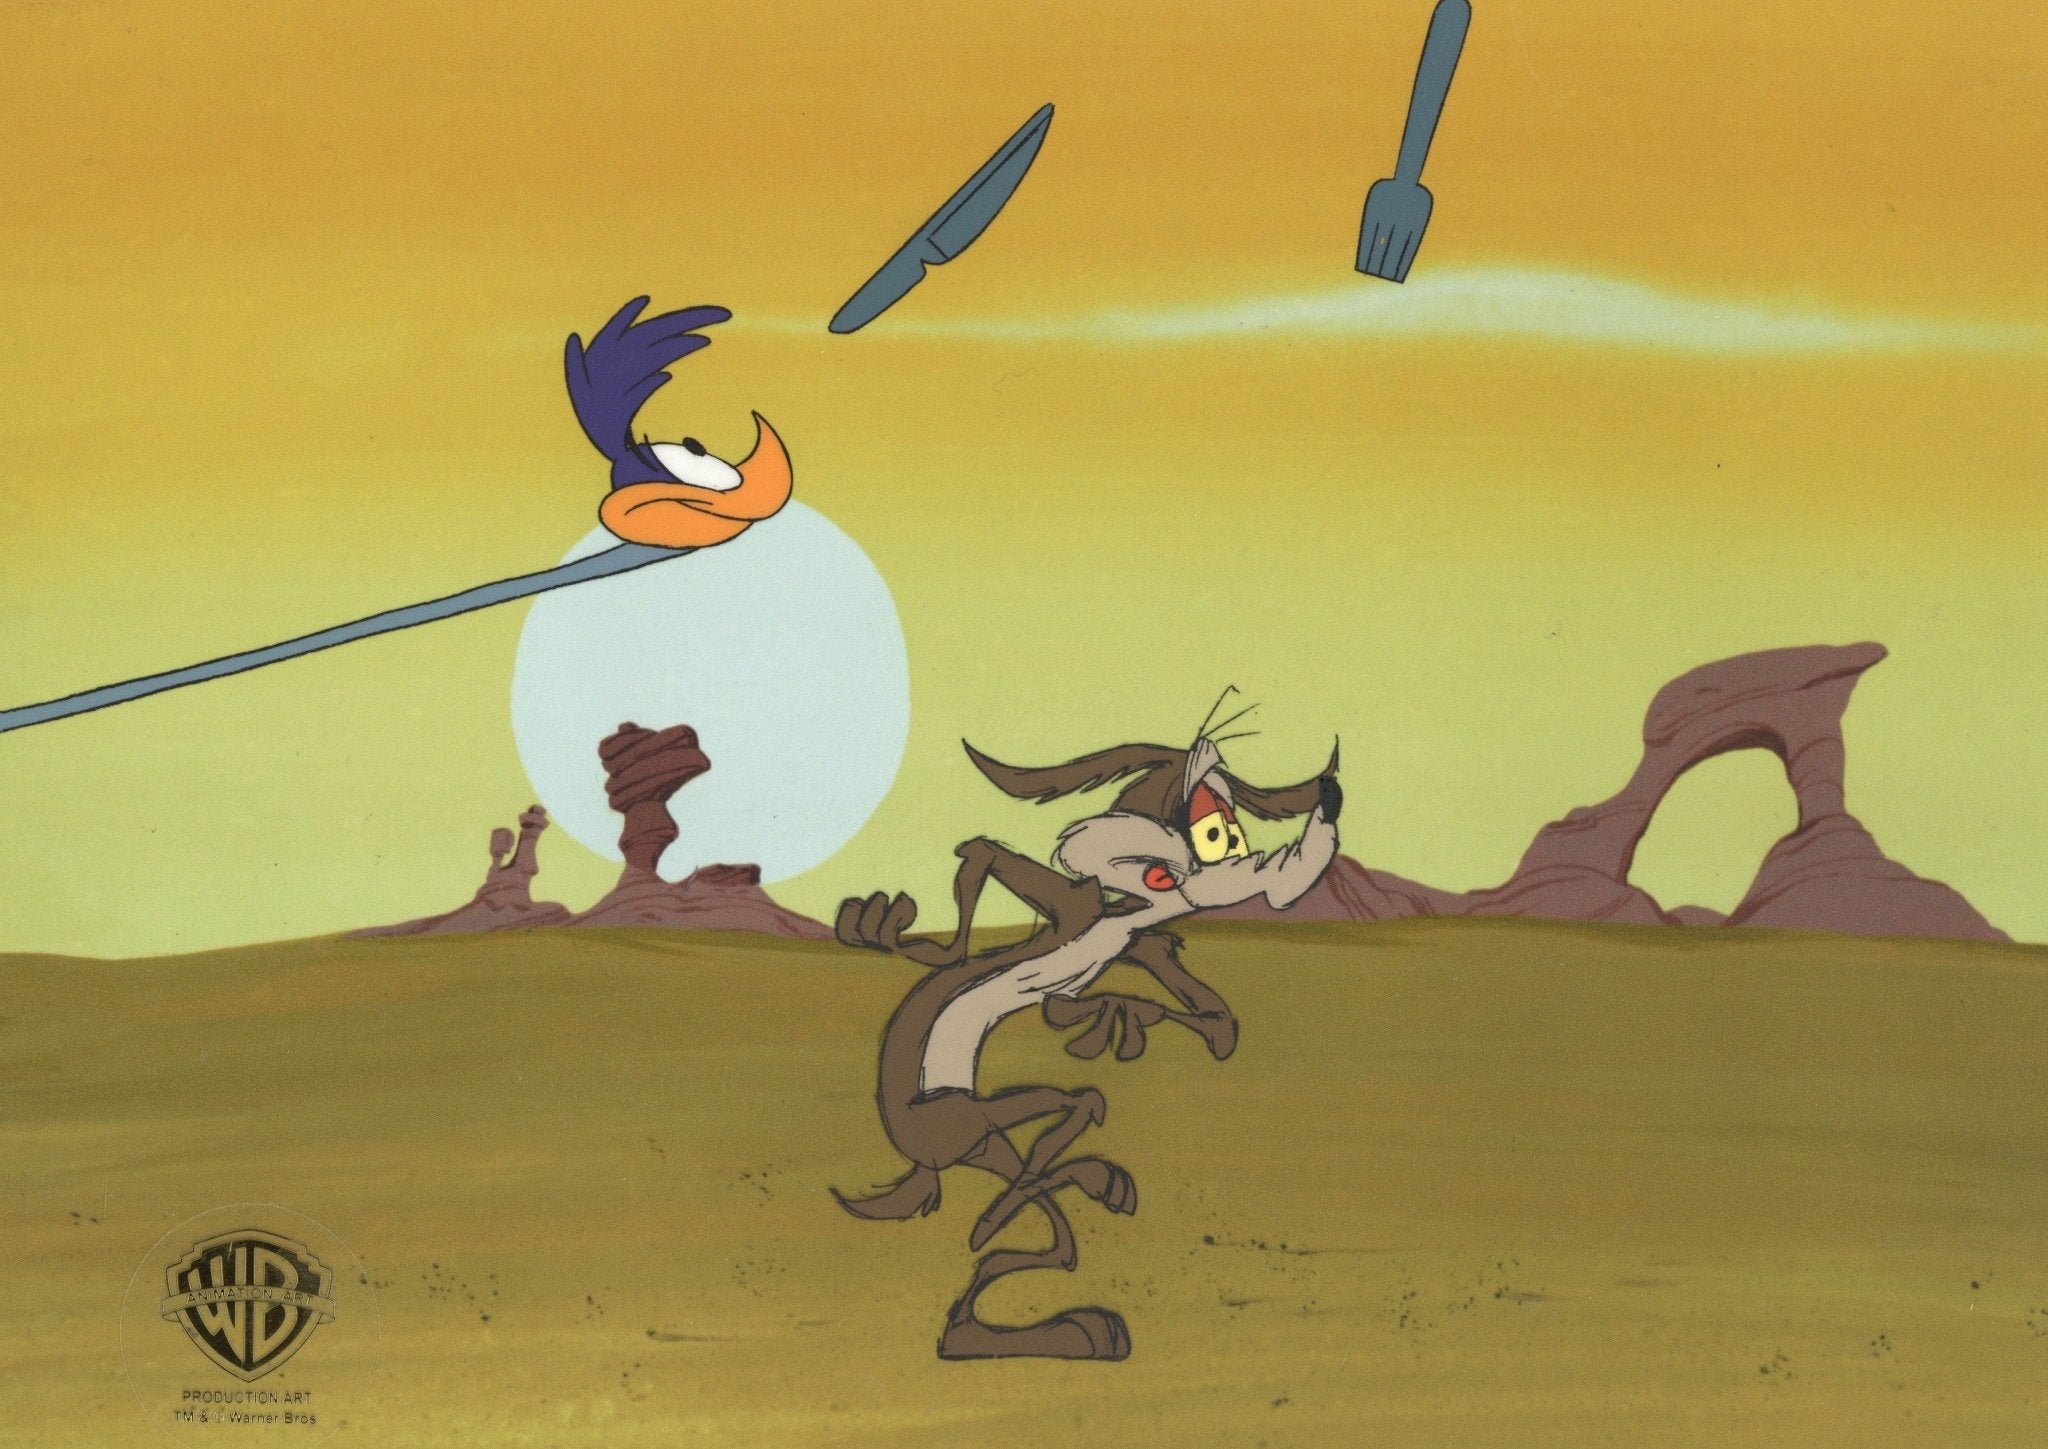 Wile E. Coyote and the Road Runner Looney Tunes Animated cartoon